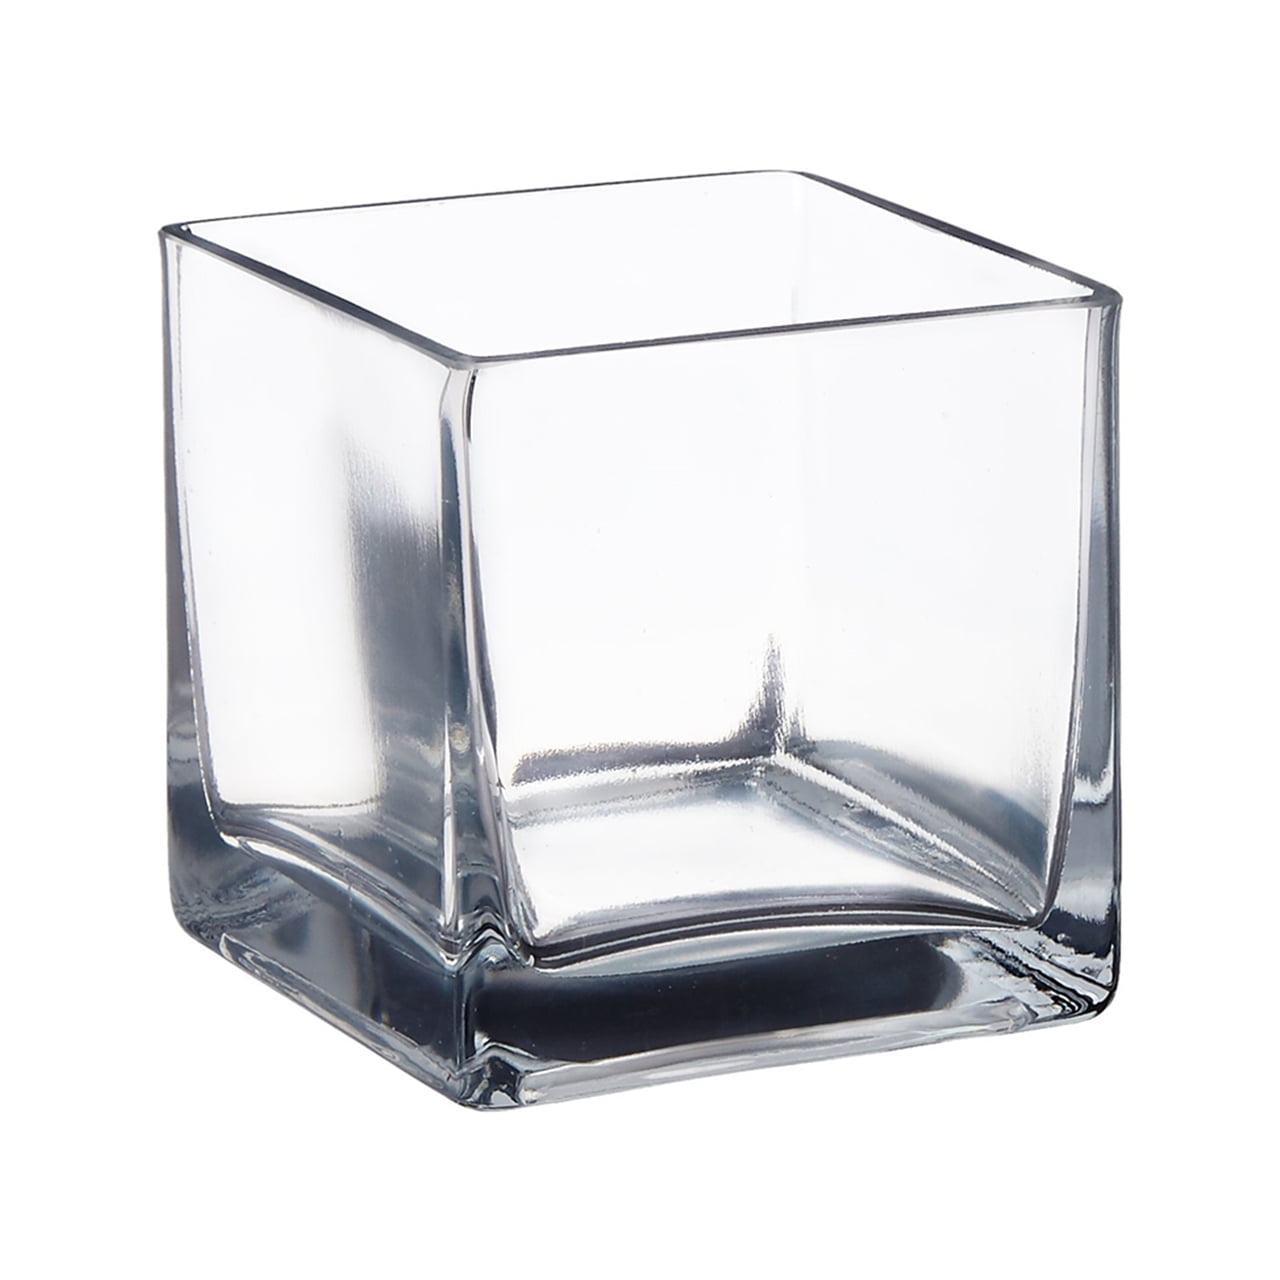 8" x 8" x 8" Oversize Centerpiece 8 Inch Clear Large Square Glass Vase Cube 